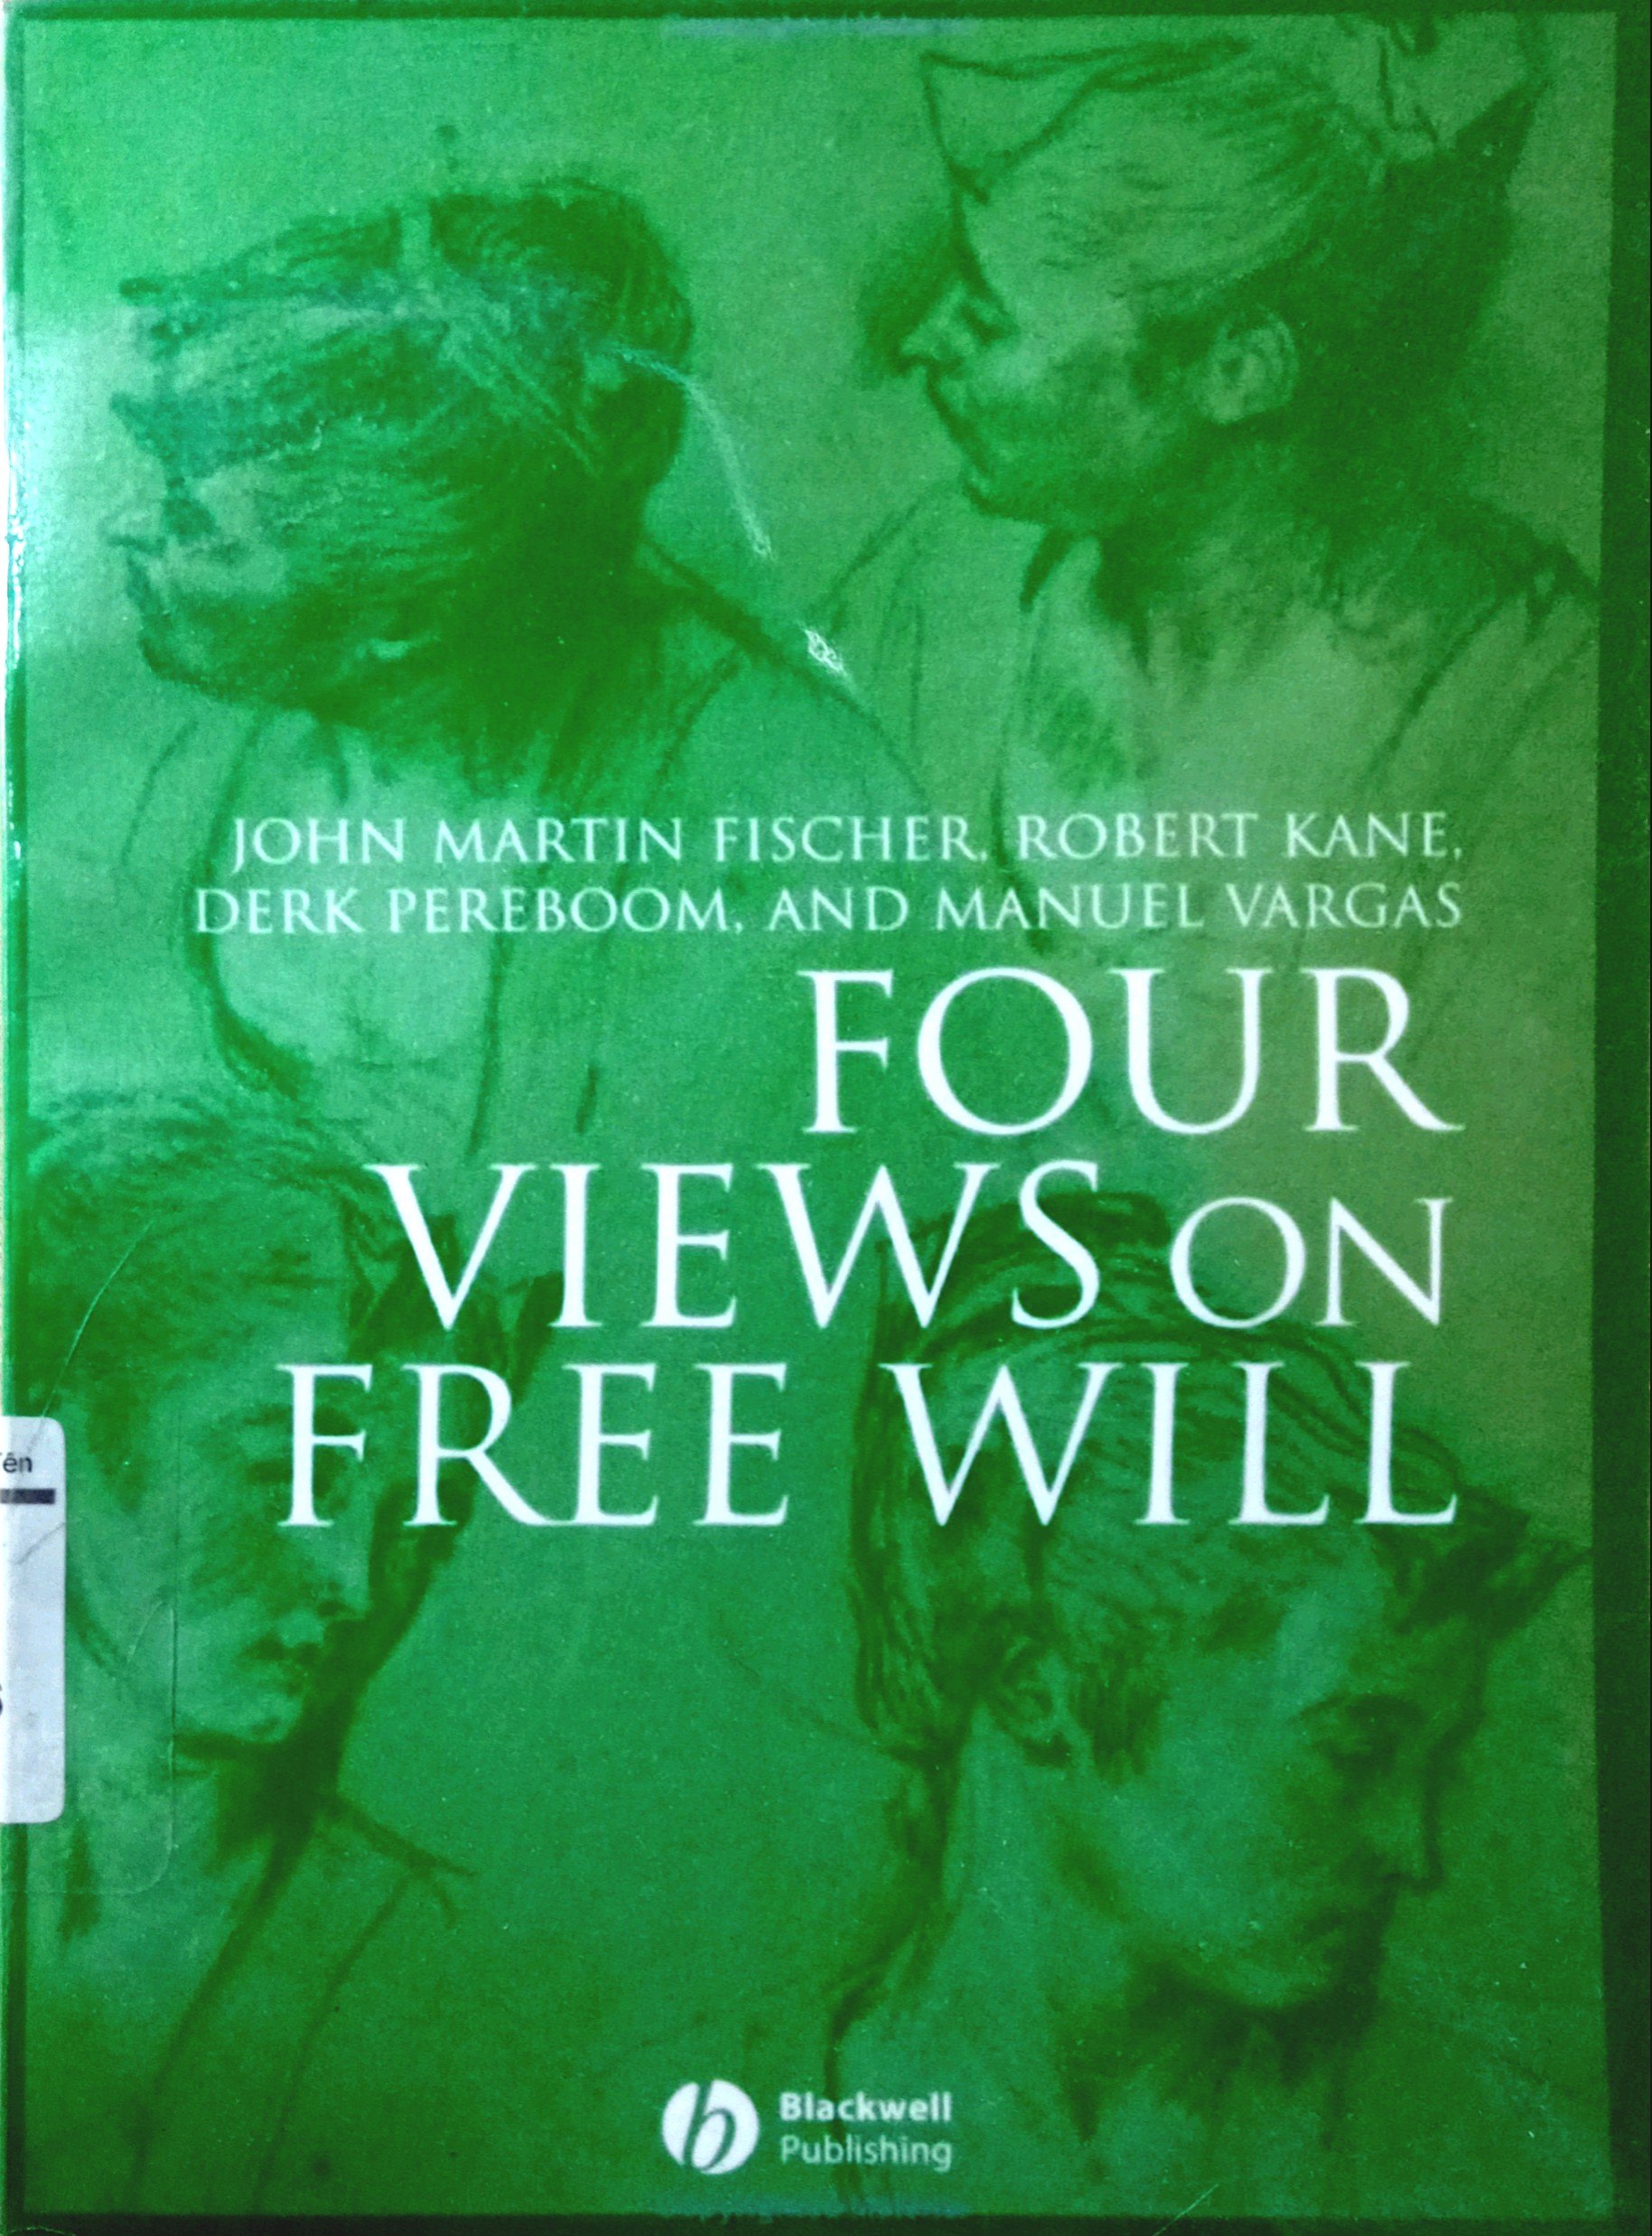 FOUR VIEWS ON FREE WILL